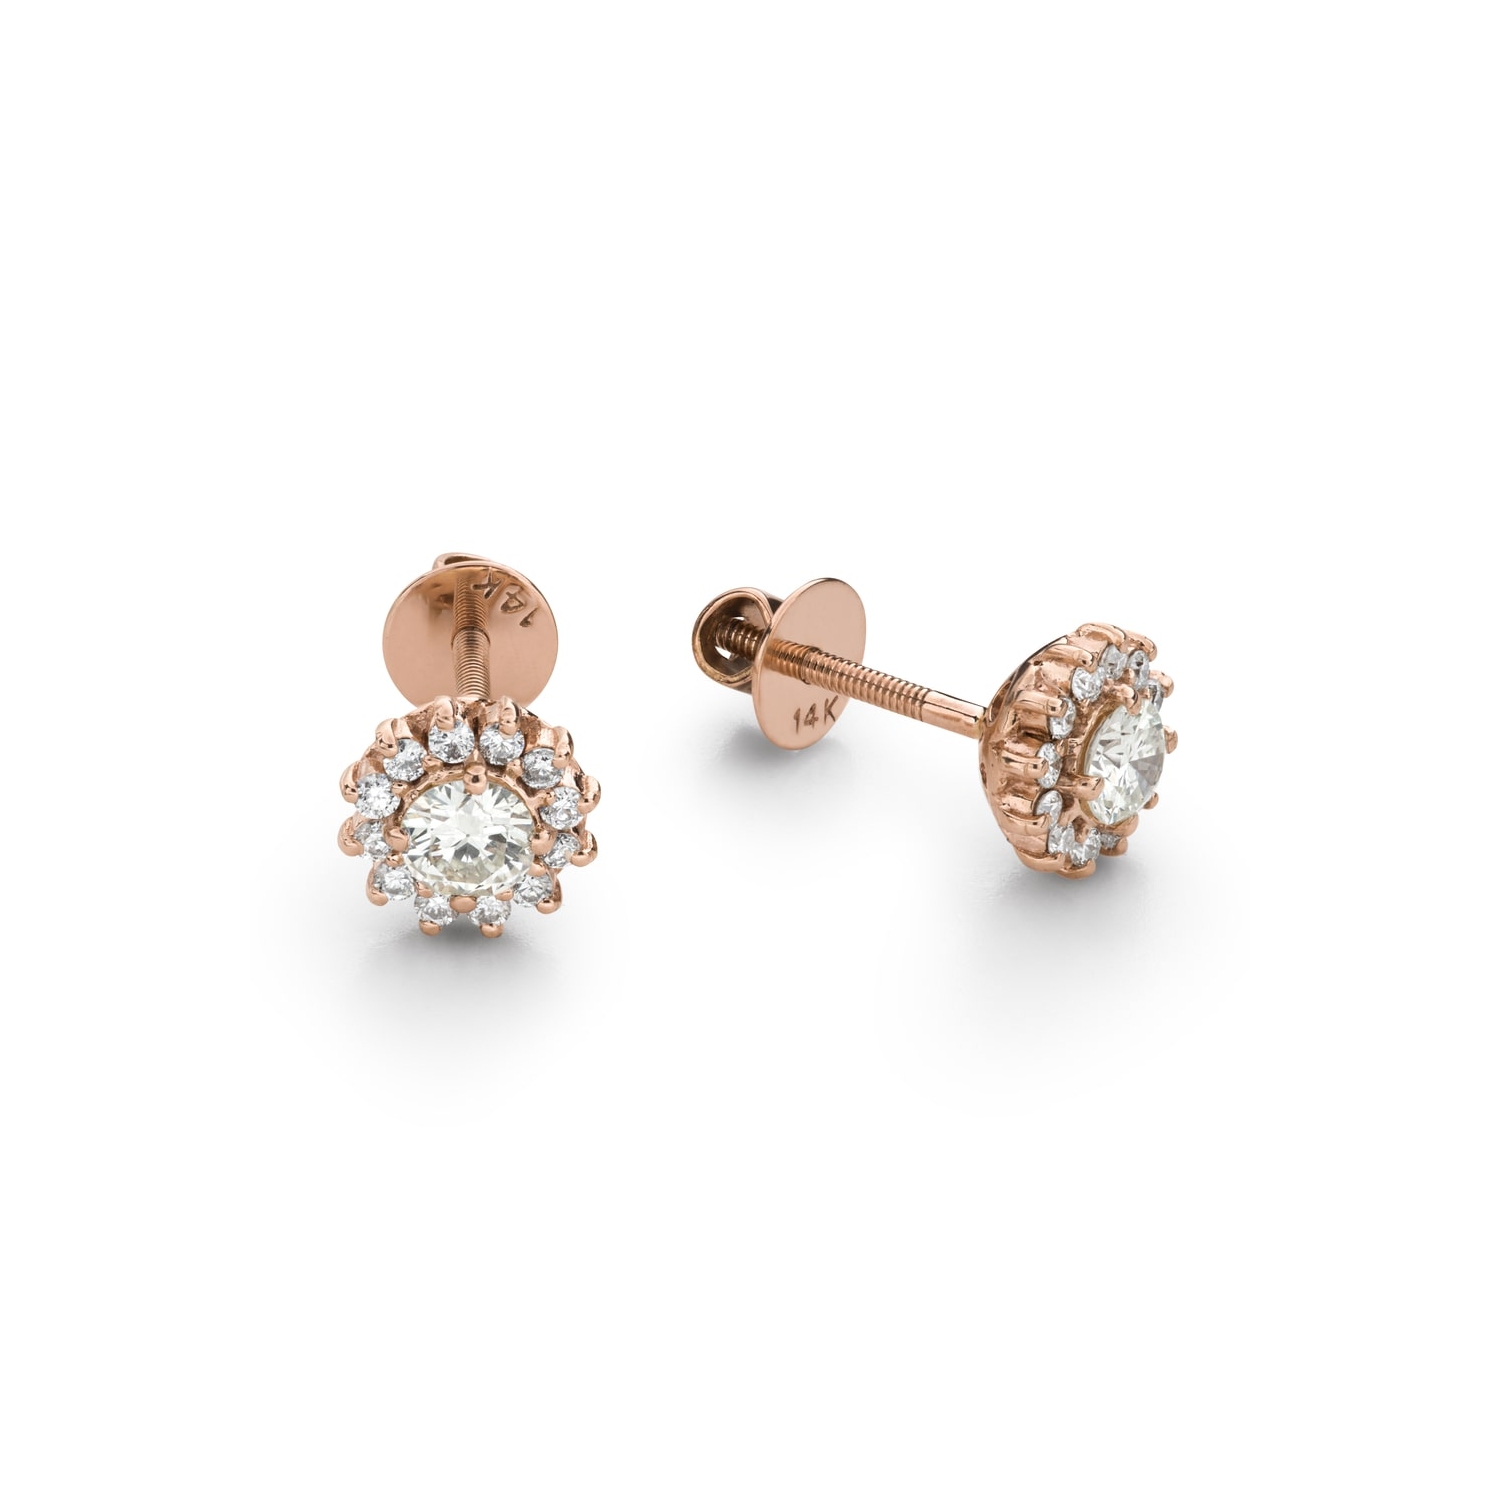 Gold earrings with brilliants "Elegance 35"